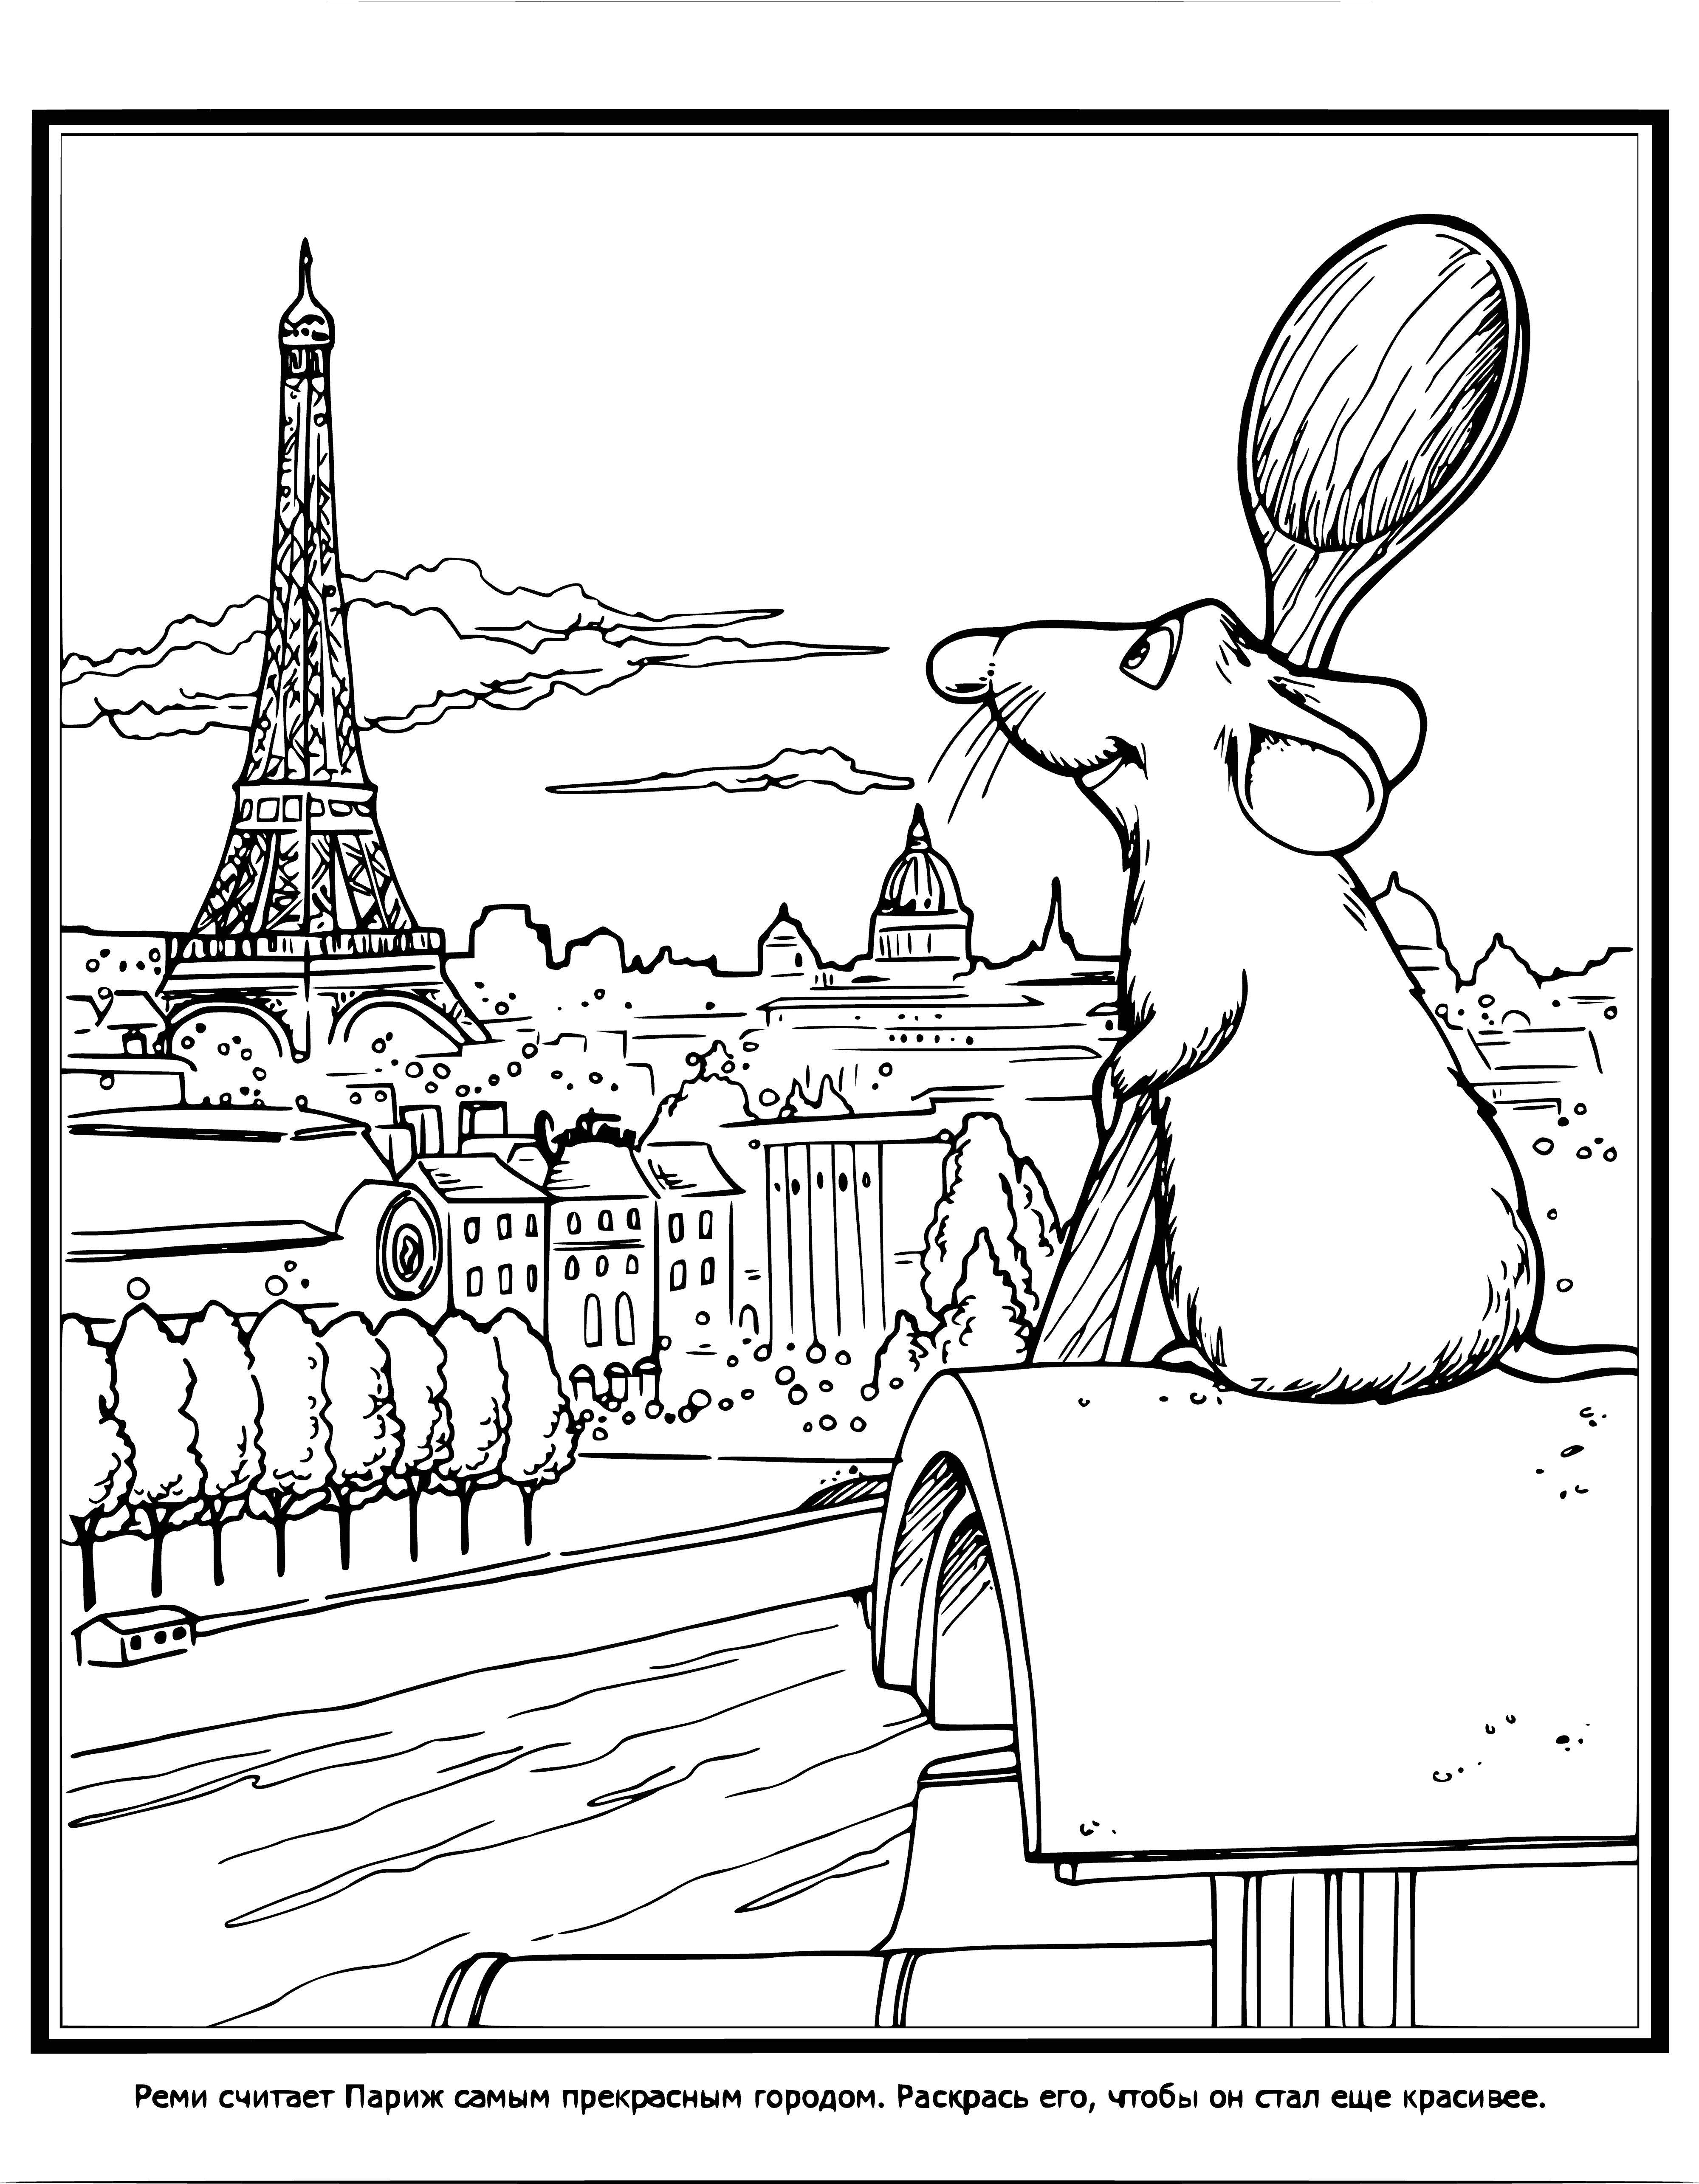 coloring page: Remy's cooking a delicious meal in a Parisian kitchen surrounded by delicious veggies!